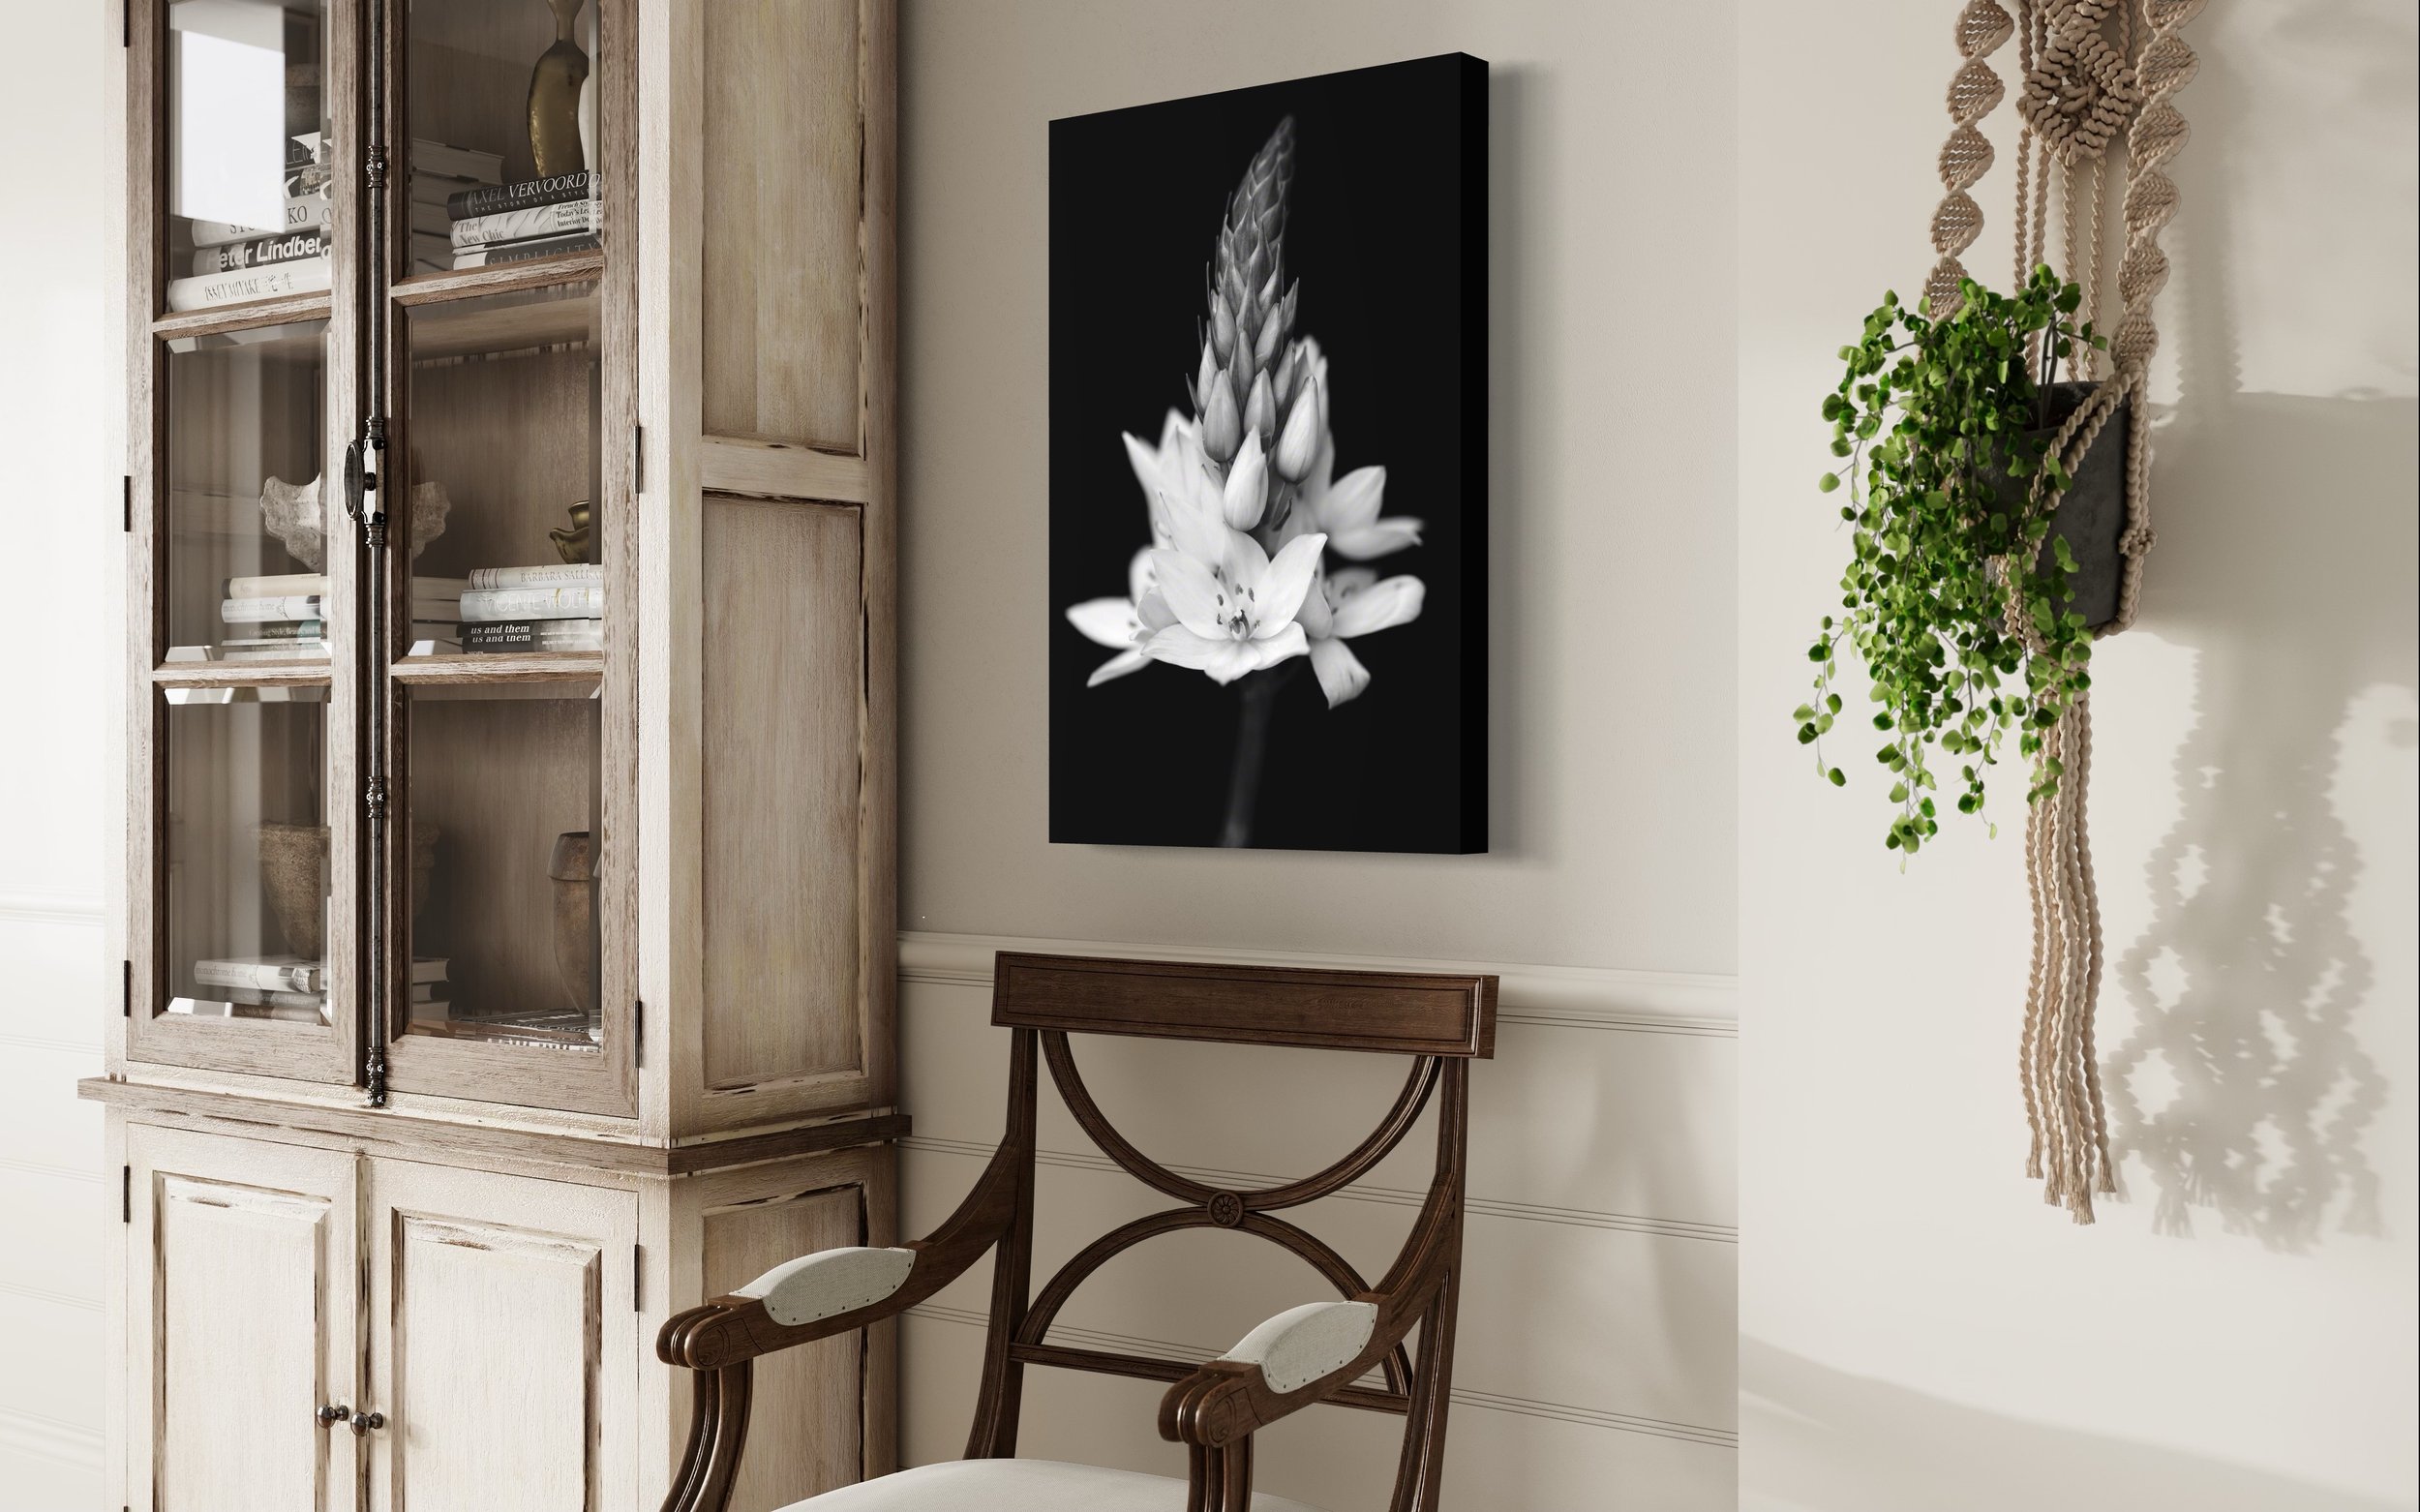  Star of Bethlehem, from the black &amp; white photographic series Portraits From a Moonlight Garden, shown in room 